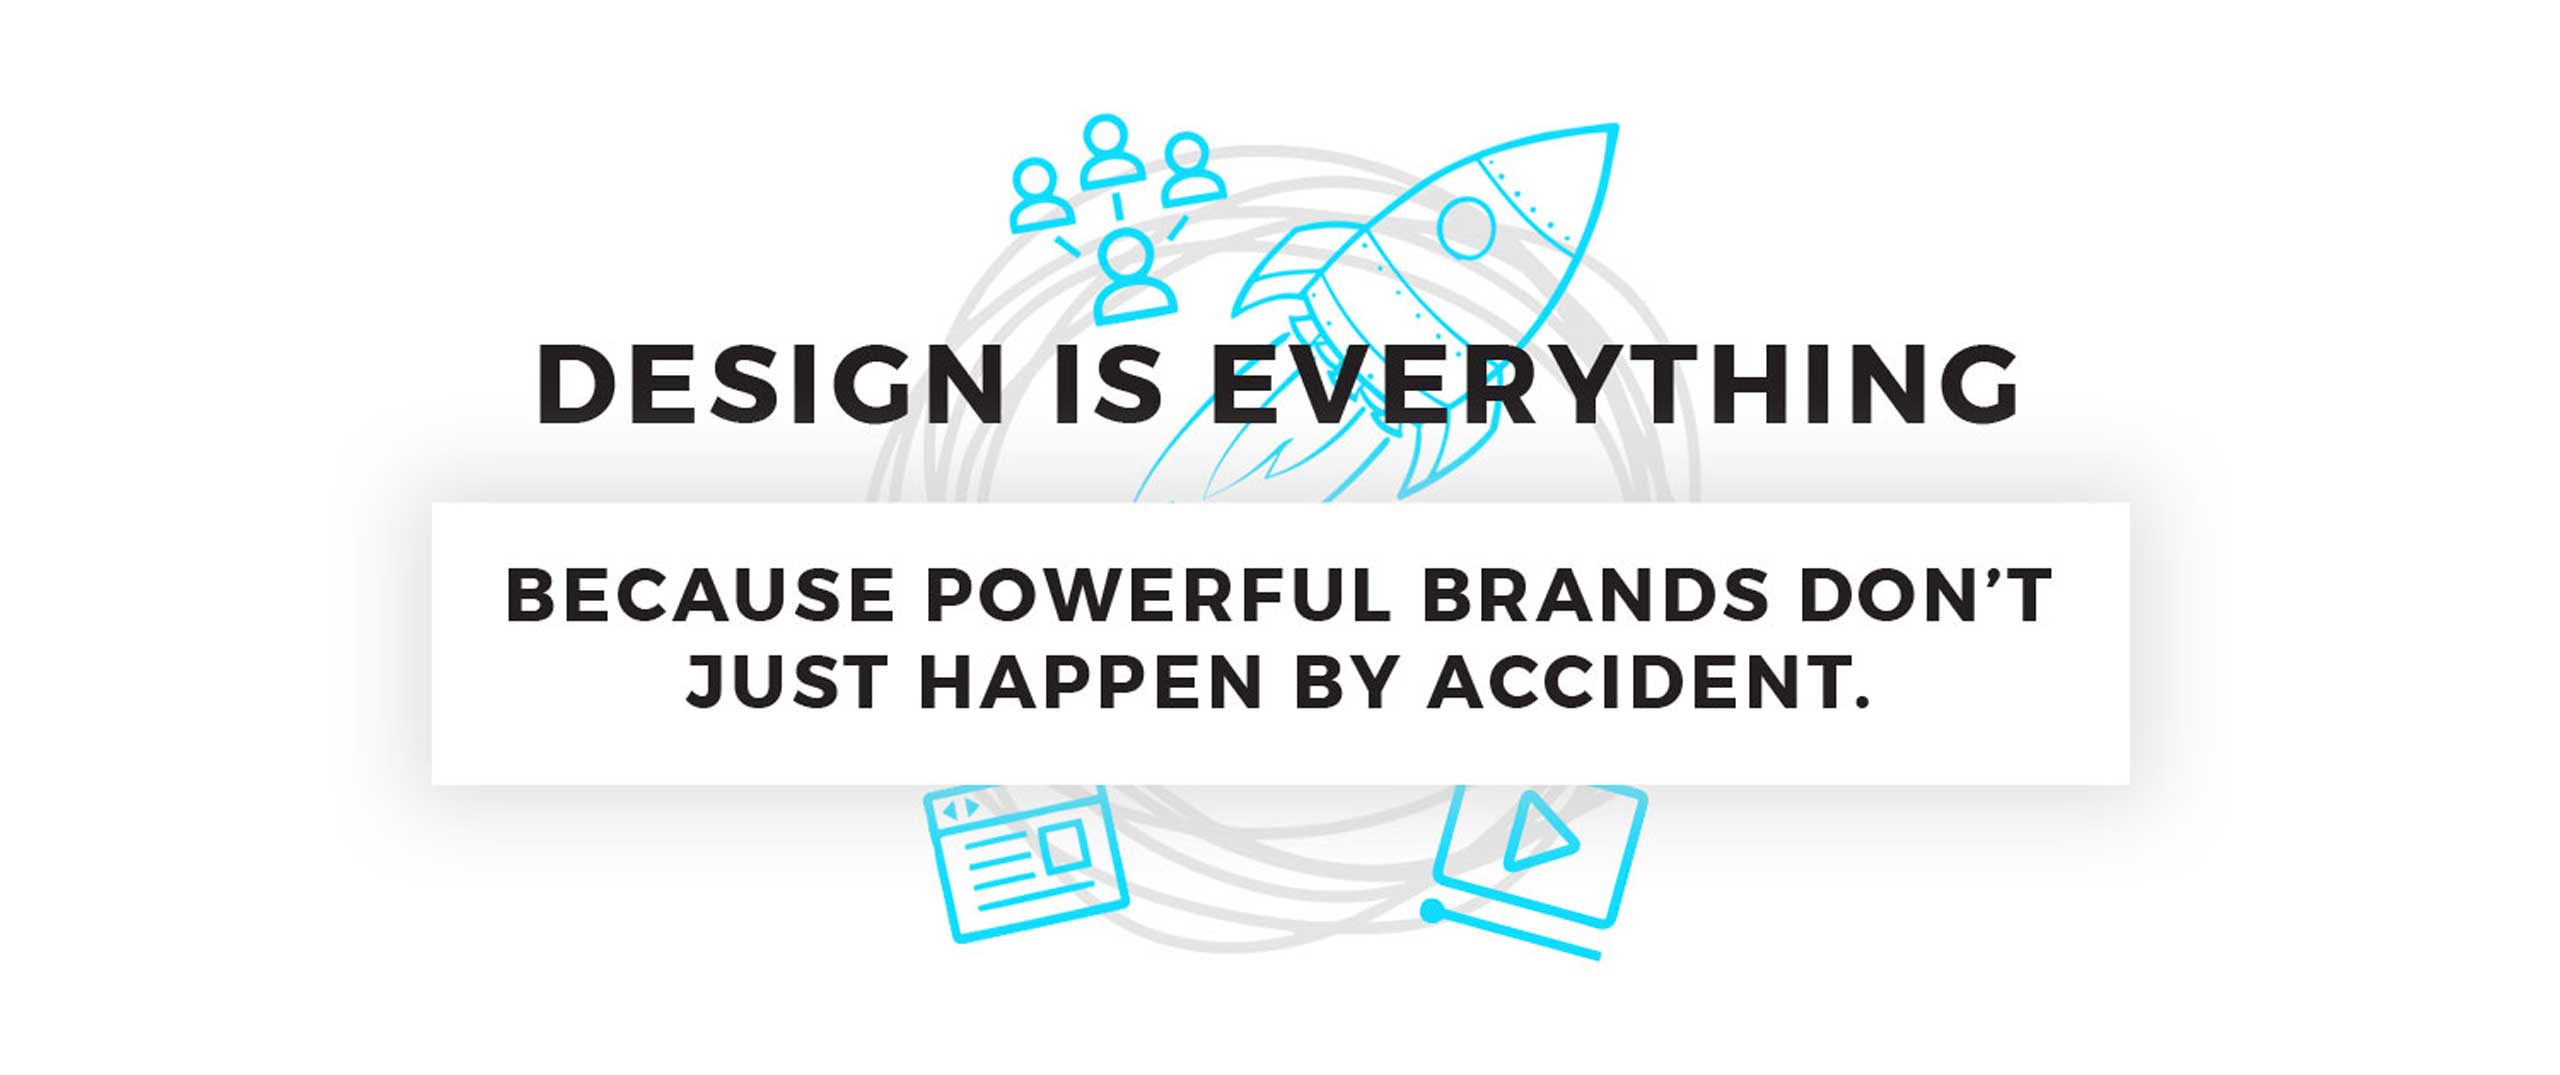 Design is Everything. BECAUSE POWERFUL BRANDS DON’T JUST HAPPEN BY ACCIDENT.